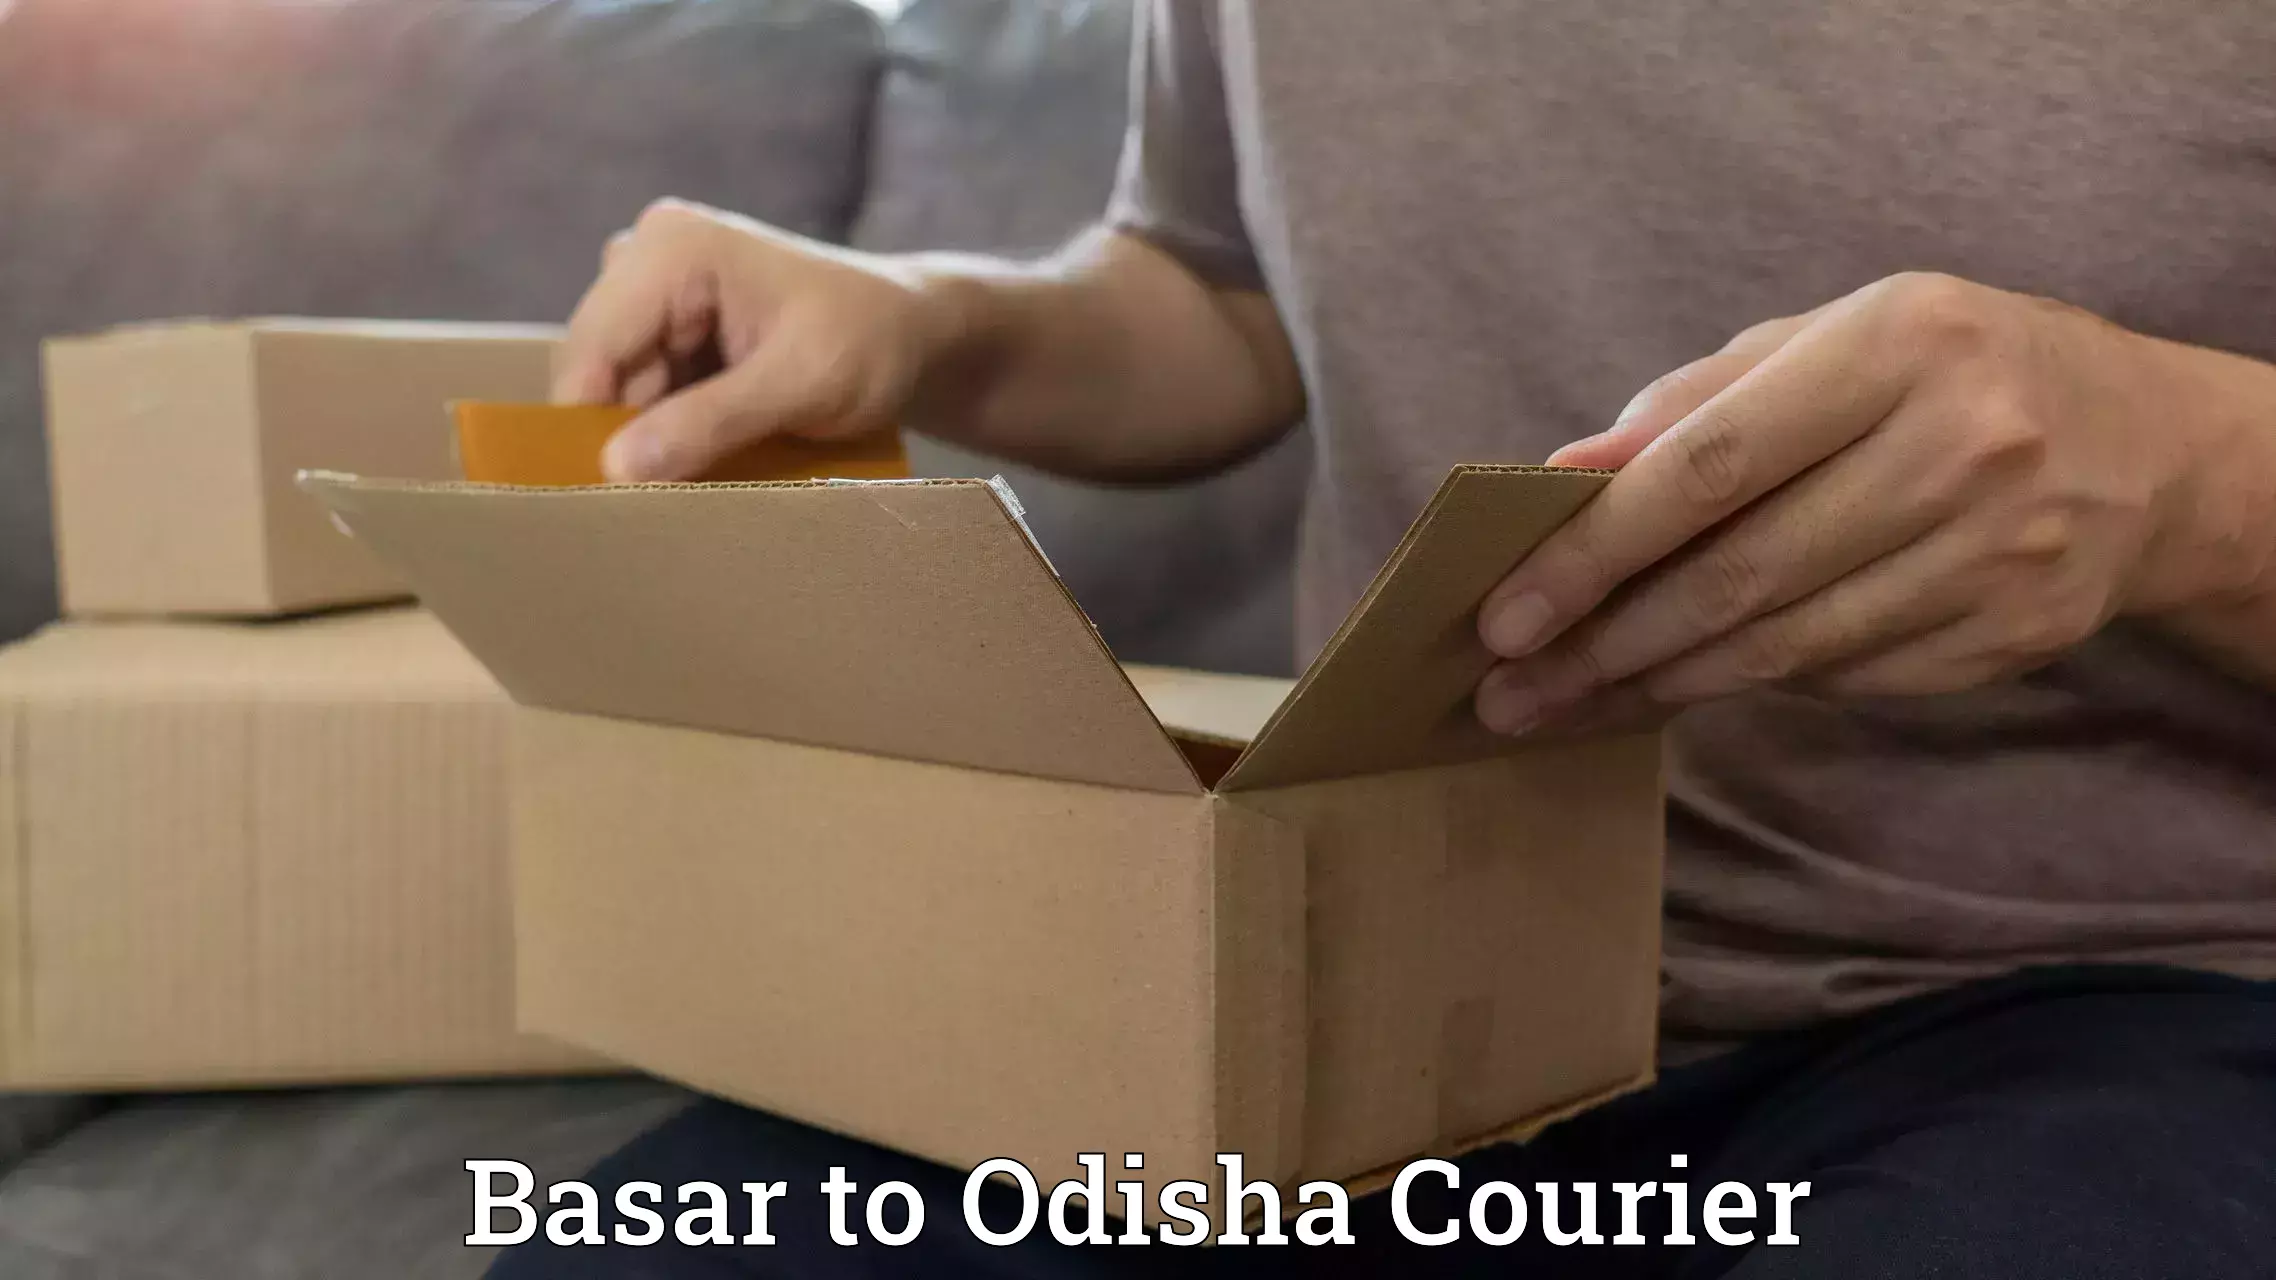 Affordable parcel service Basar to Tihidi